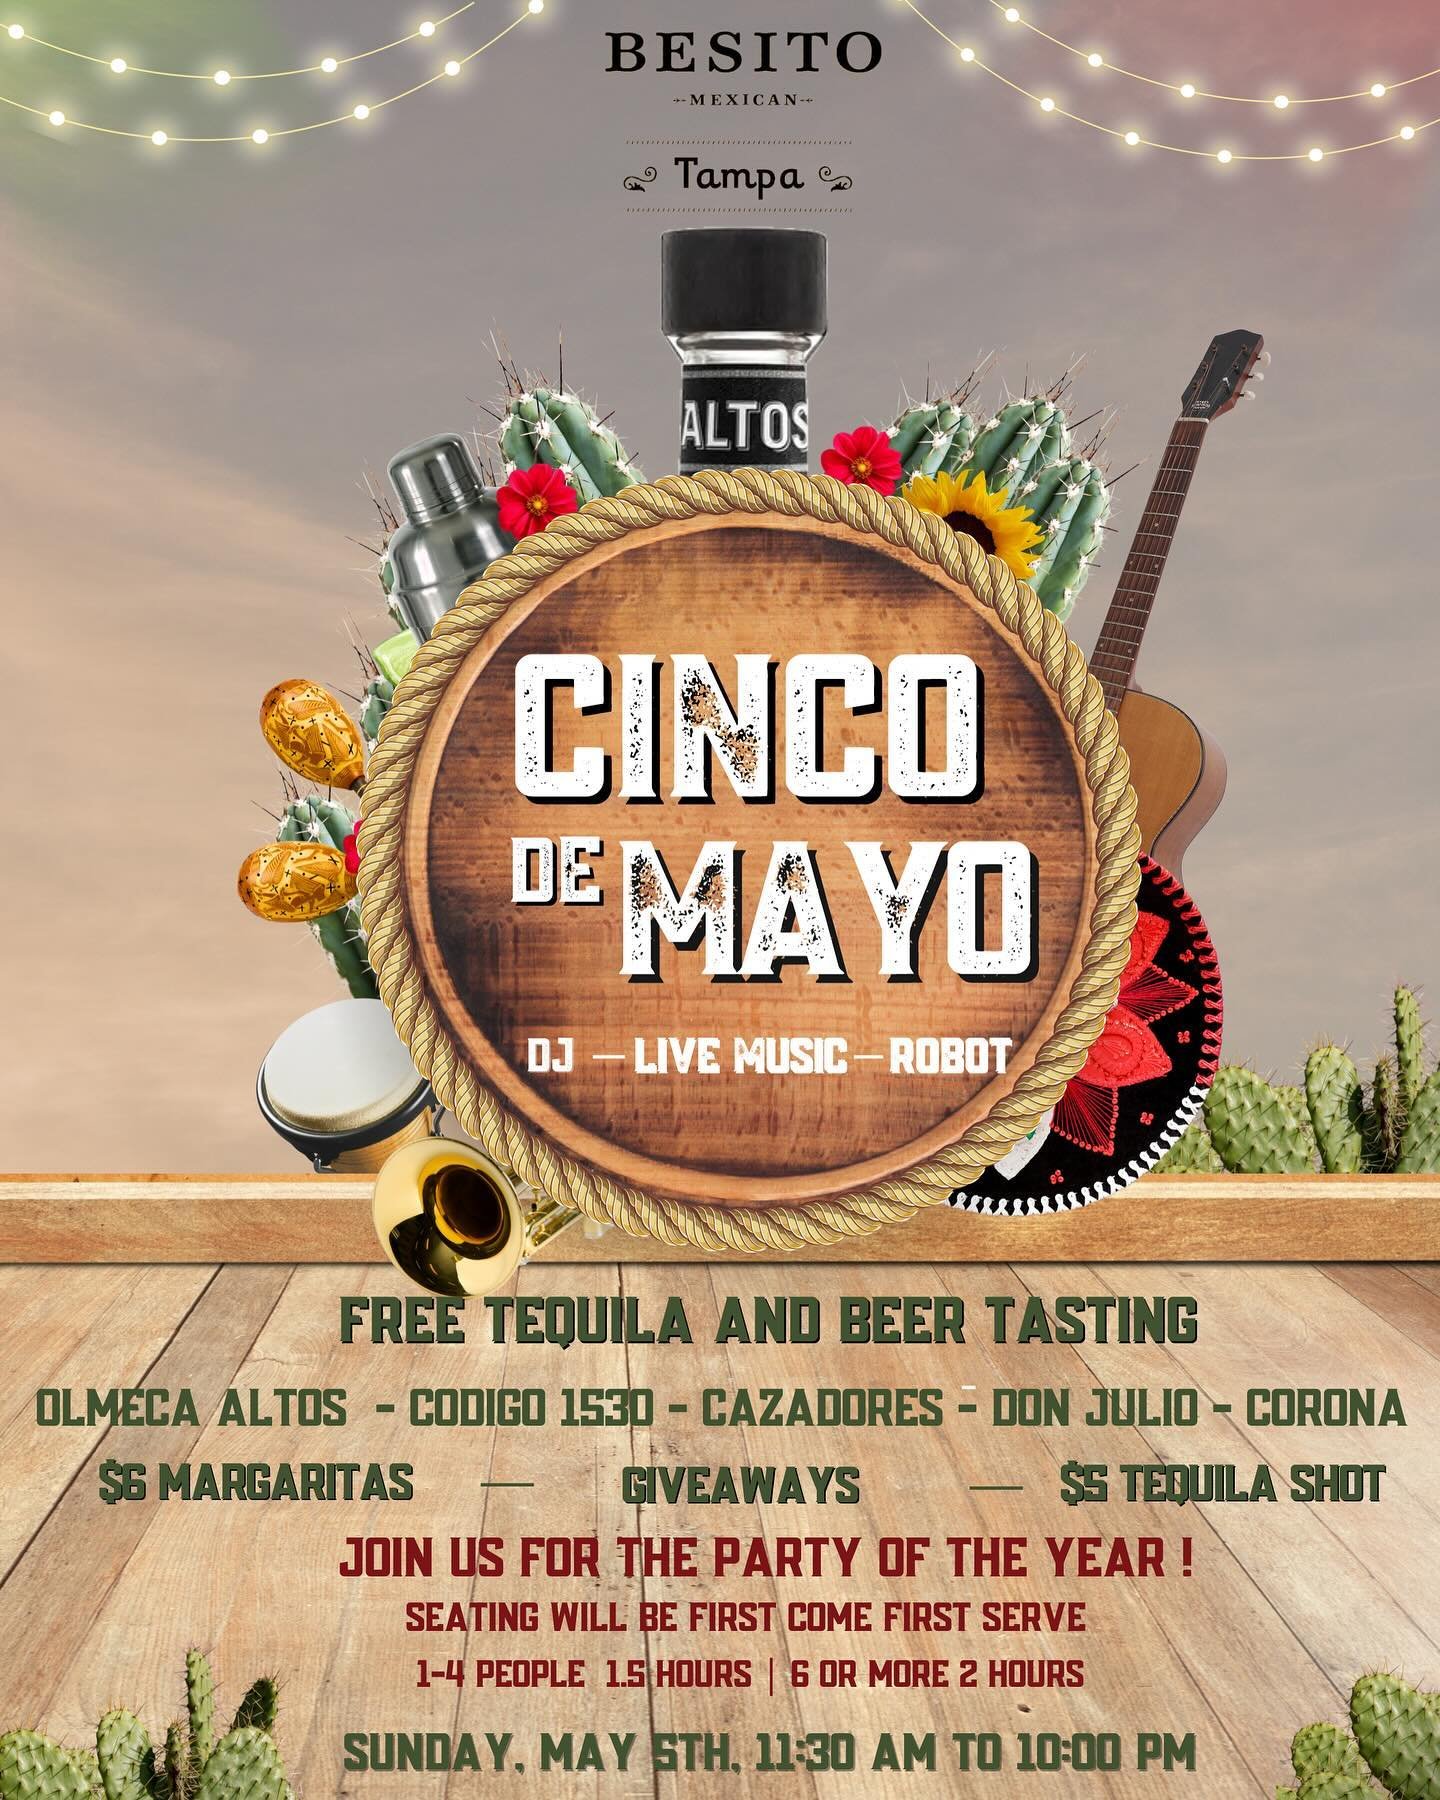 🎉 Fiesta Alert! 🎉 Celebrate Cinco de Mayo in style with us! We&rsquo;re going all out with free tequila tastings, live DJ sets, thrilling live music, and even a robot show! 🤖🎶

Don&rsquo;t miss the biggest Mexican party of the year! Join the fun 